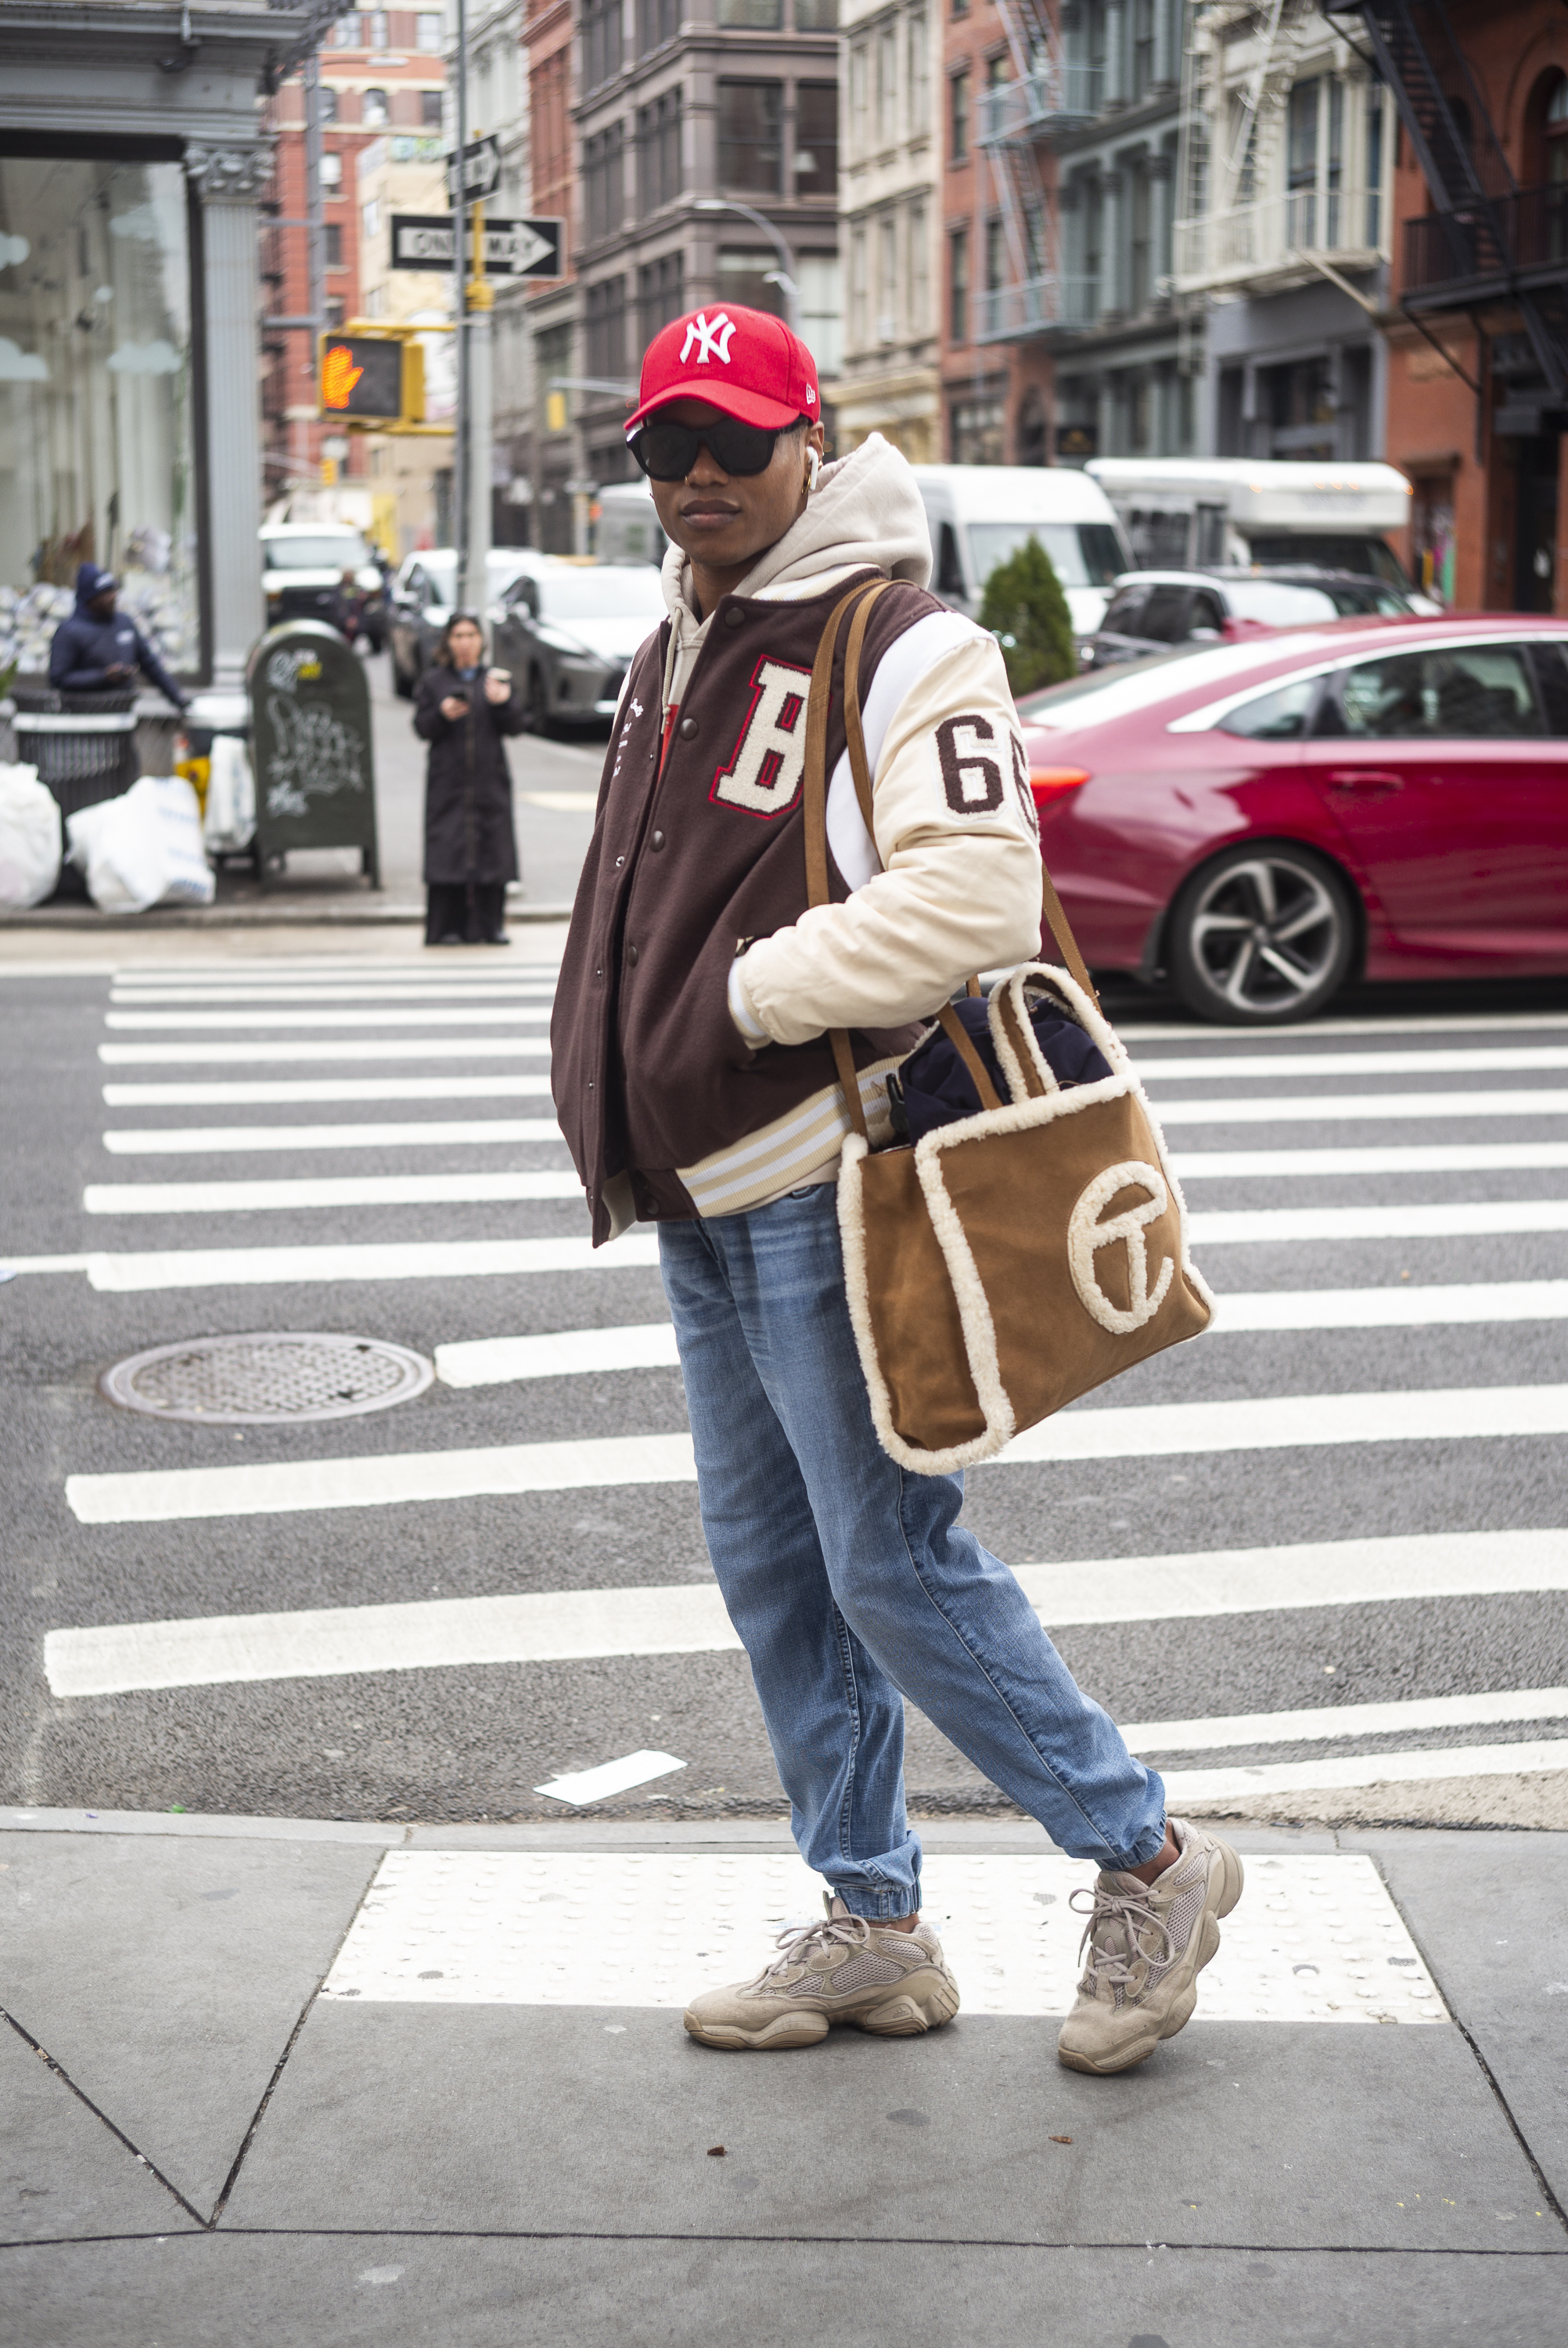 How did the Telfar Shopping Bag become NYC's 'it' accessory? We asked owners.  - Gothamist